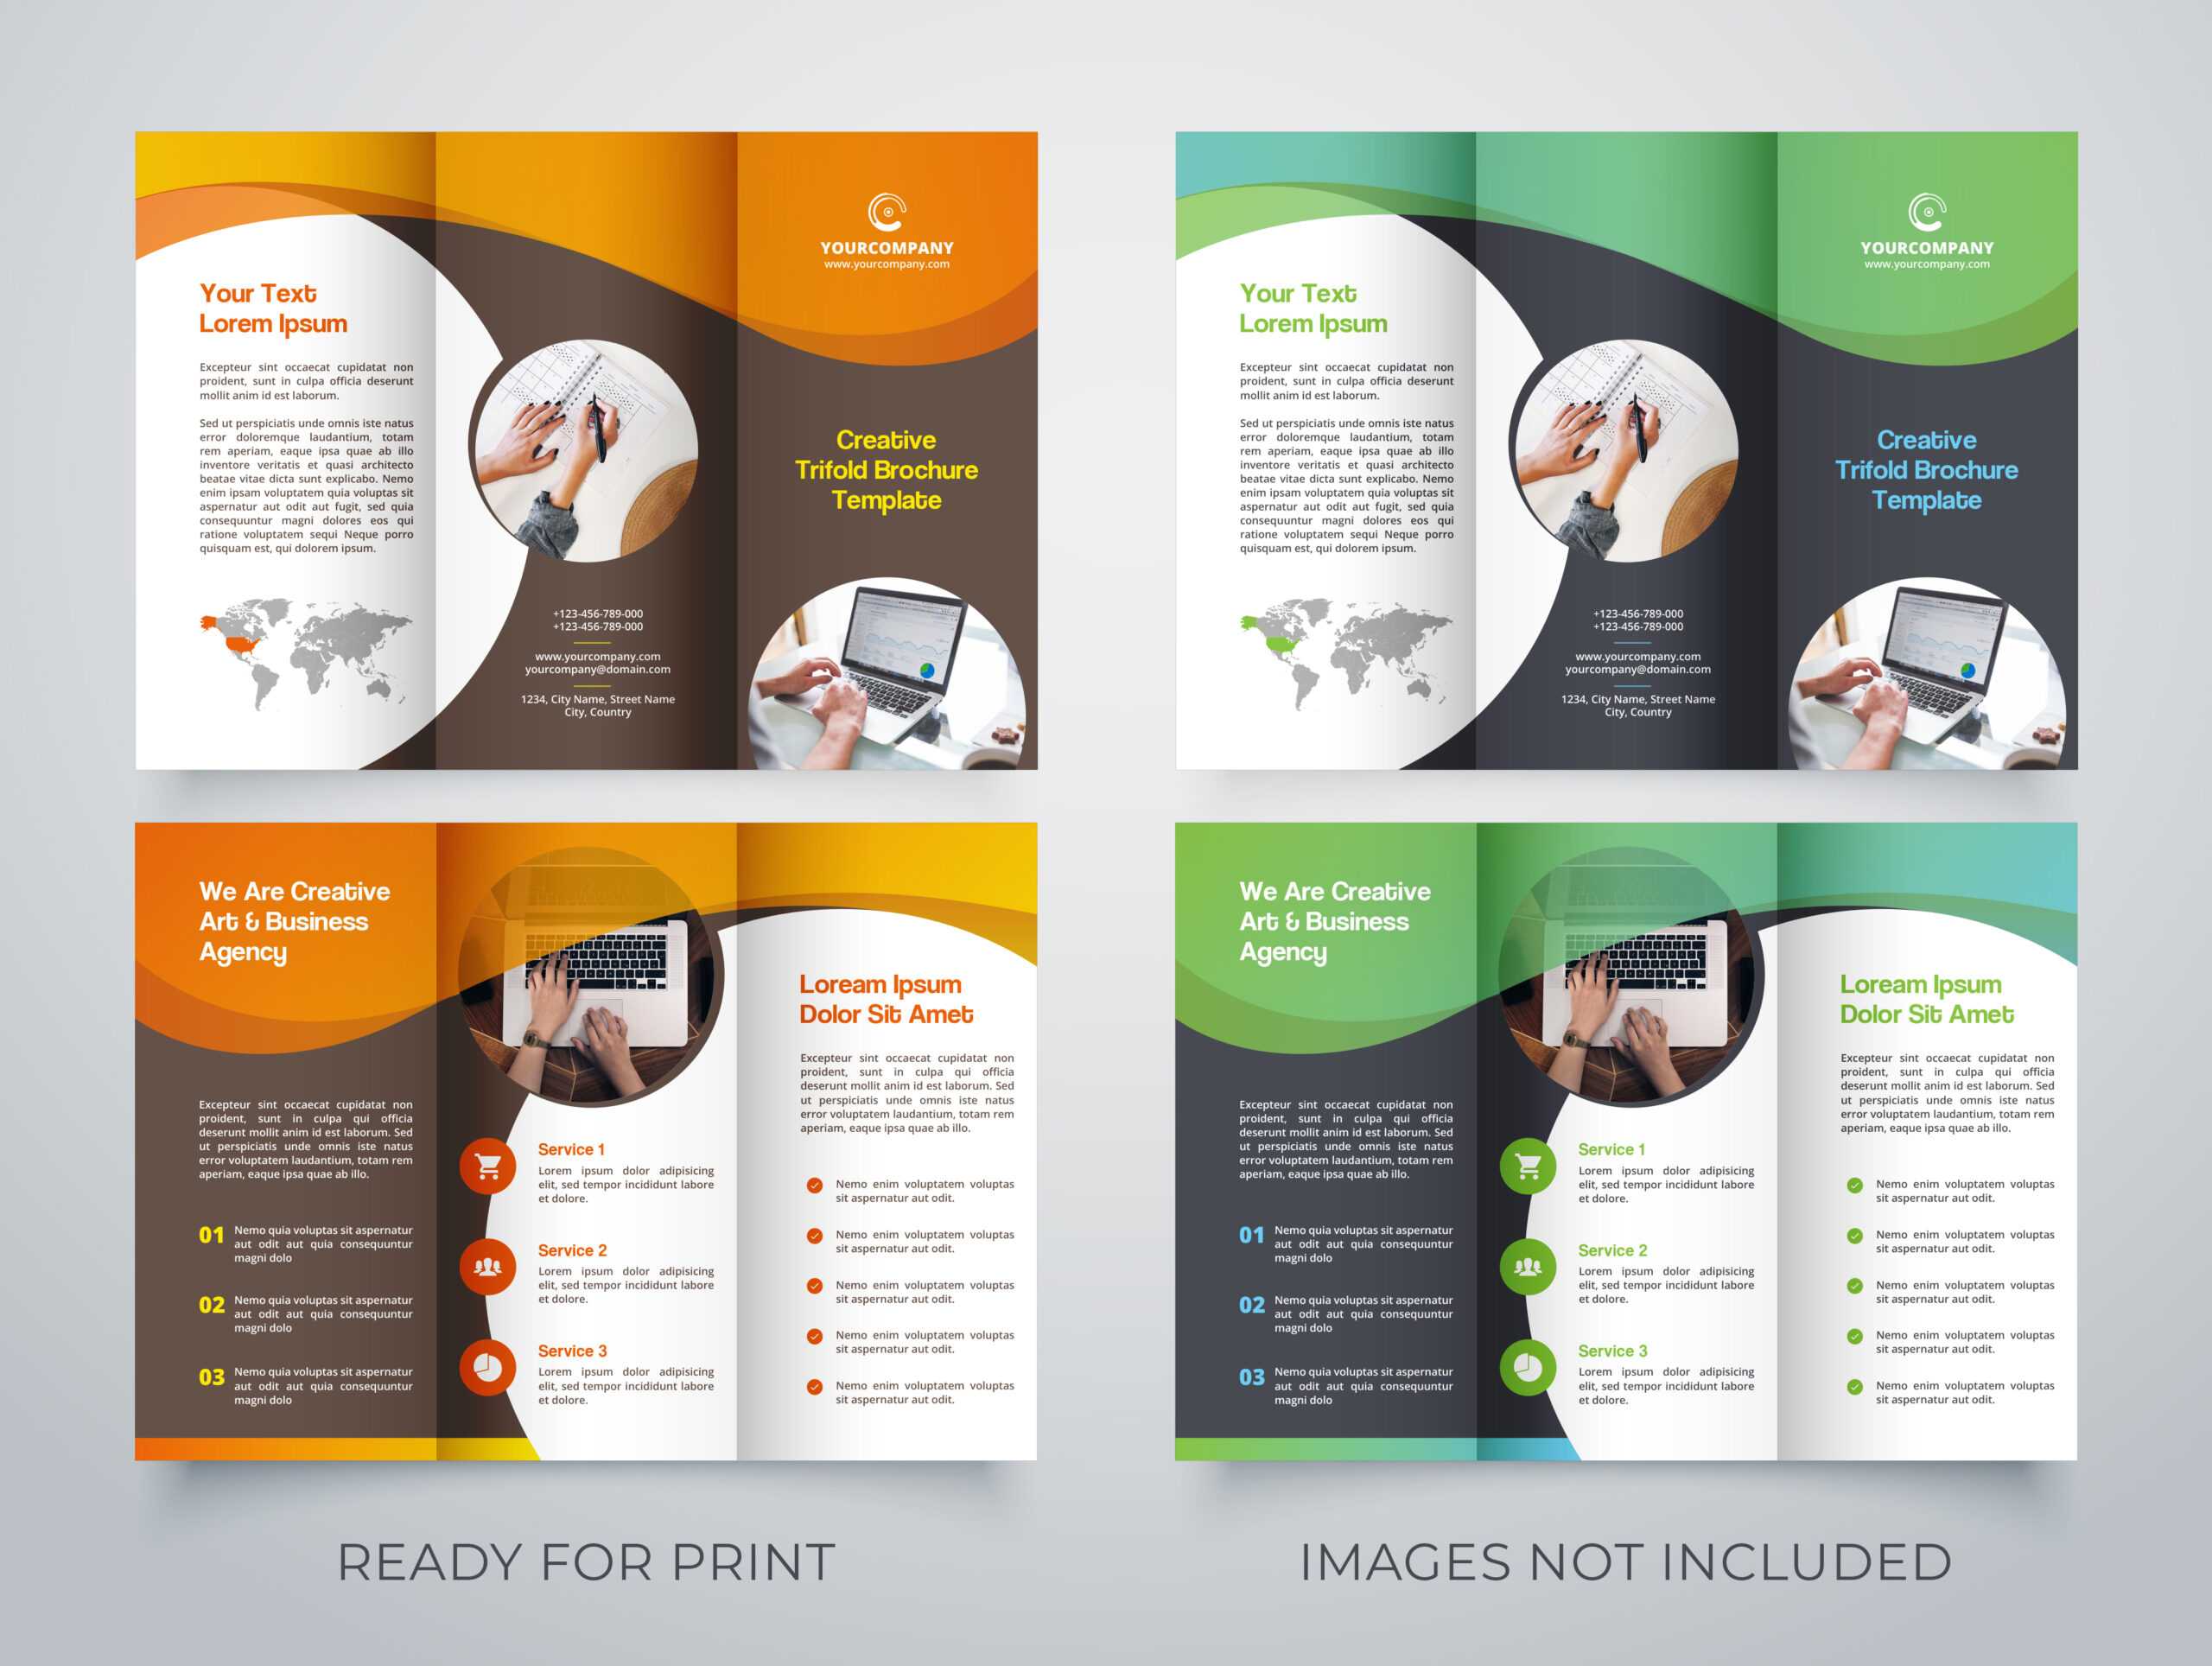 Creative Trifold Brochure Template. 2 Color Styles №80614 Pertaining To Membership Brochure Template